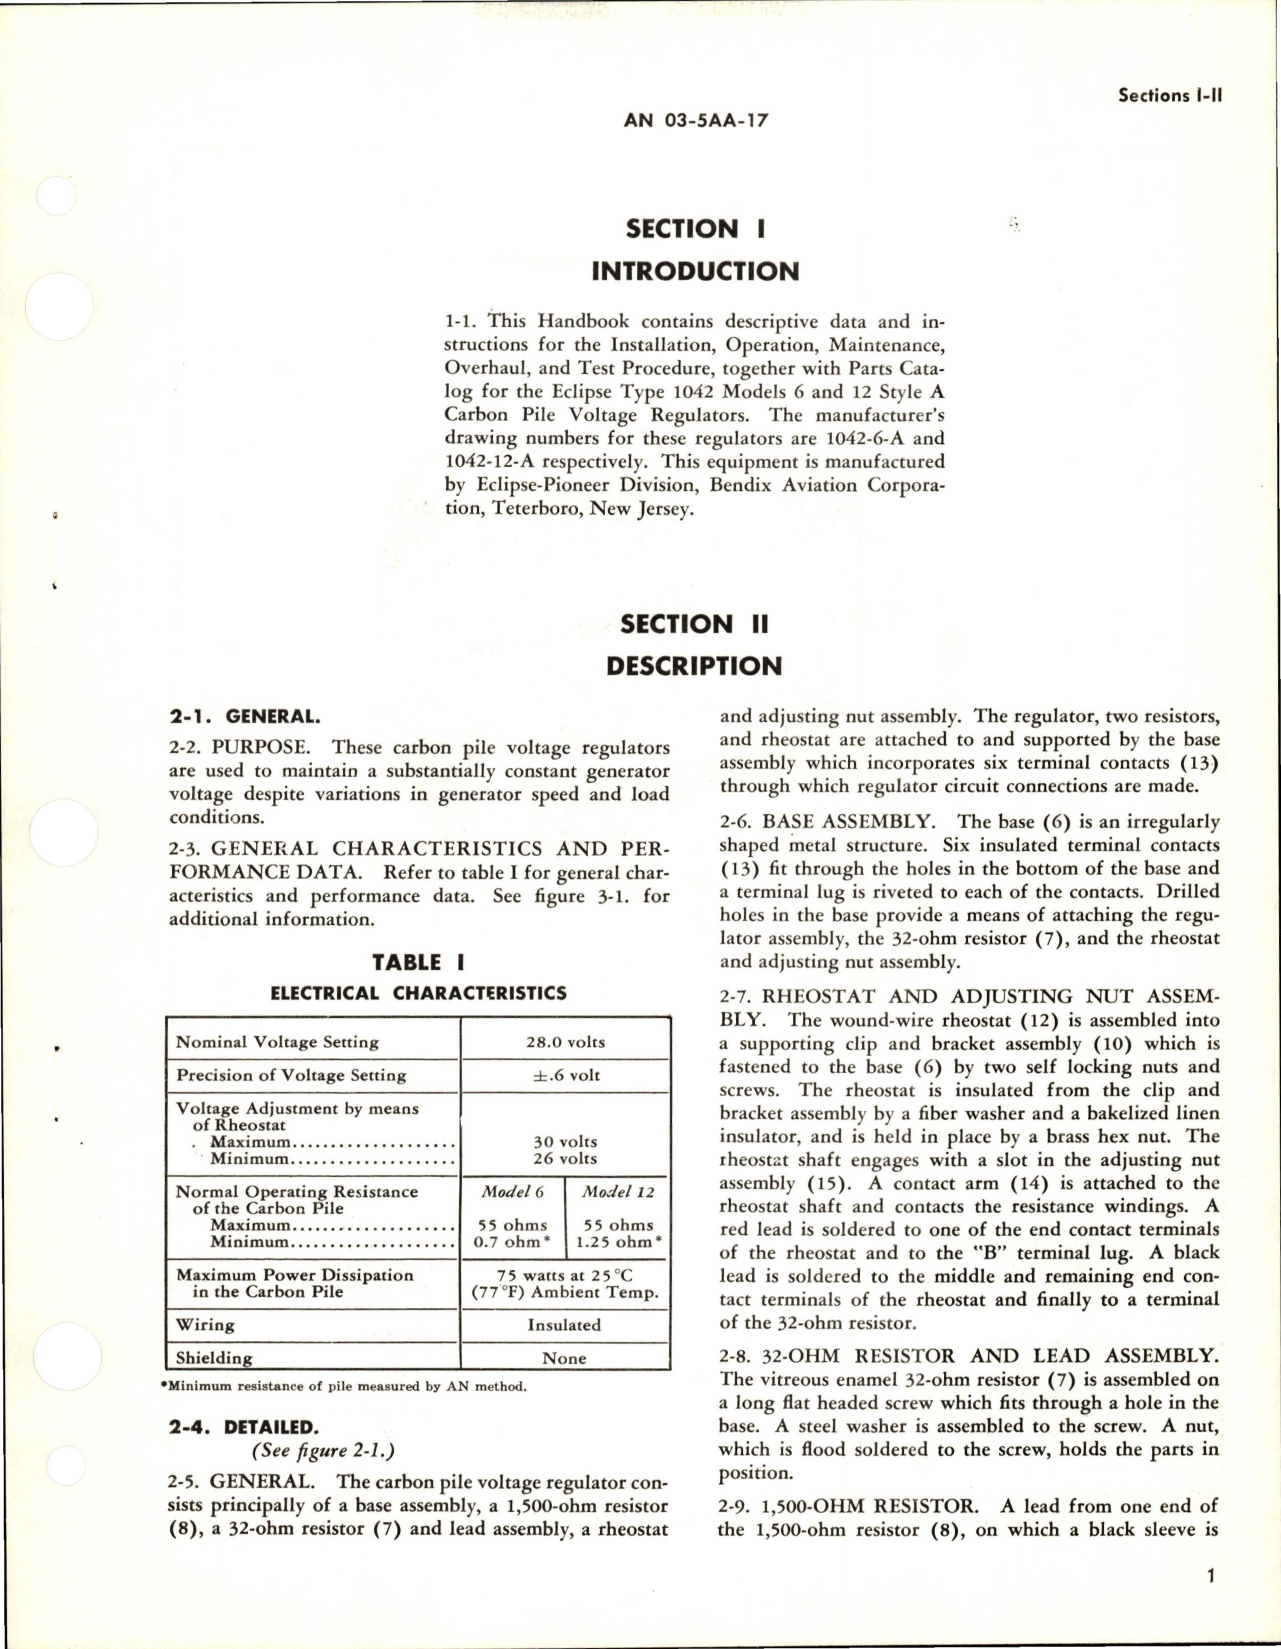 Sample page 5 from AirCorps Library document: Operation, Service, and Overhaul Instructions with Parts Catalog for Carbon Pile Voltage Regulator - 1042-6A and 1042-12A